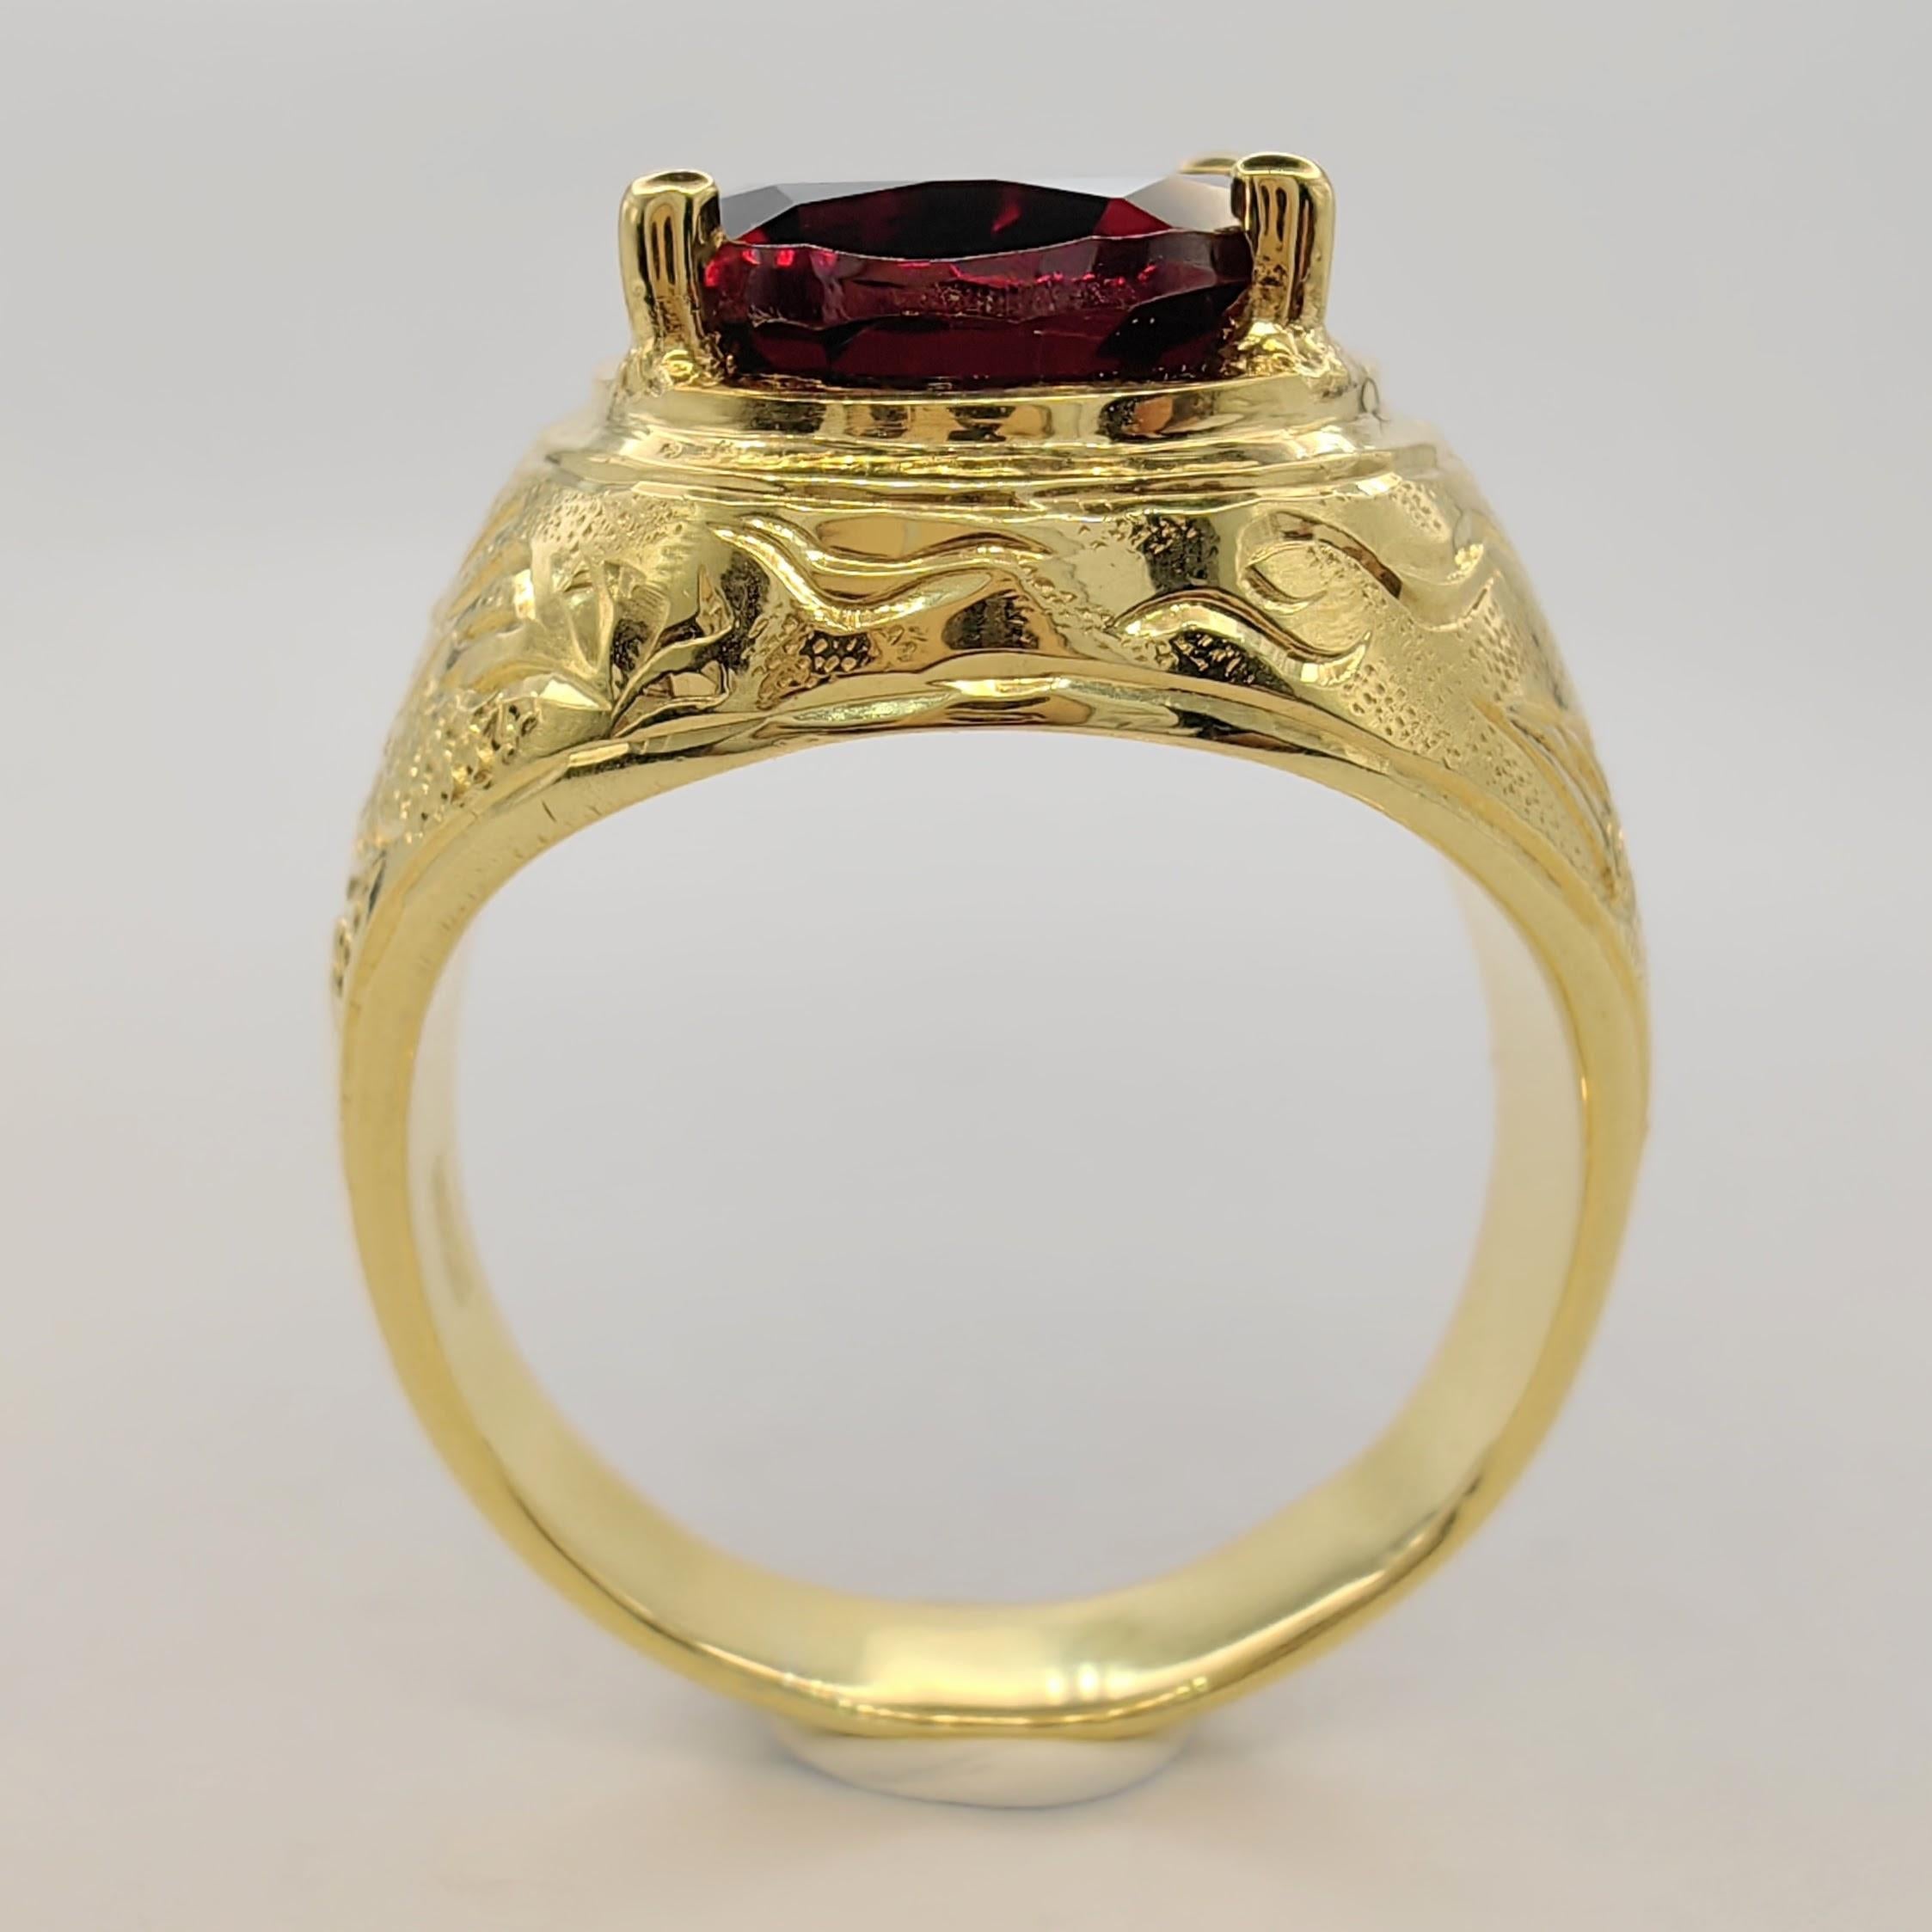 Contemporary Vintage 5.32 Carat Oval-cut Rubellite Dragon & Phoenix Ring in 14K Yellow Gold For Sale